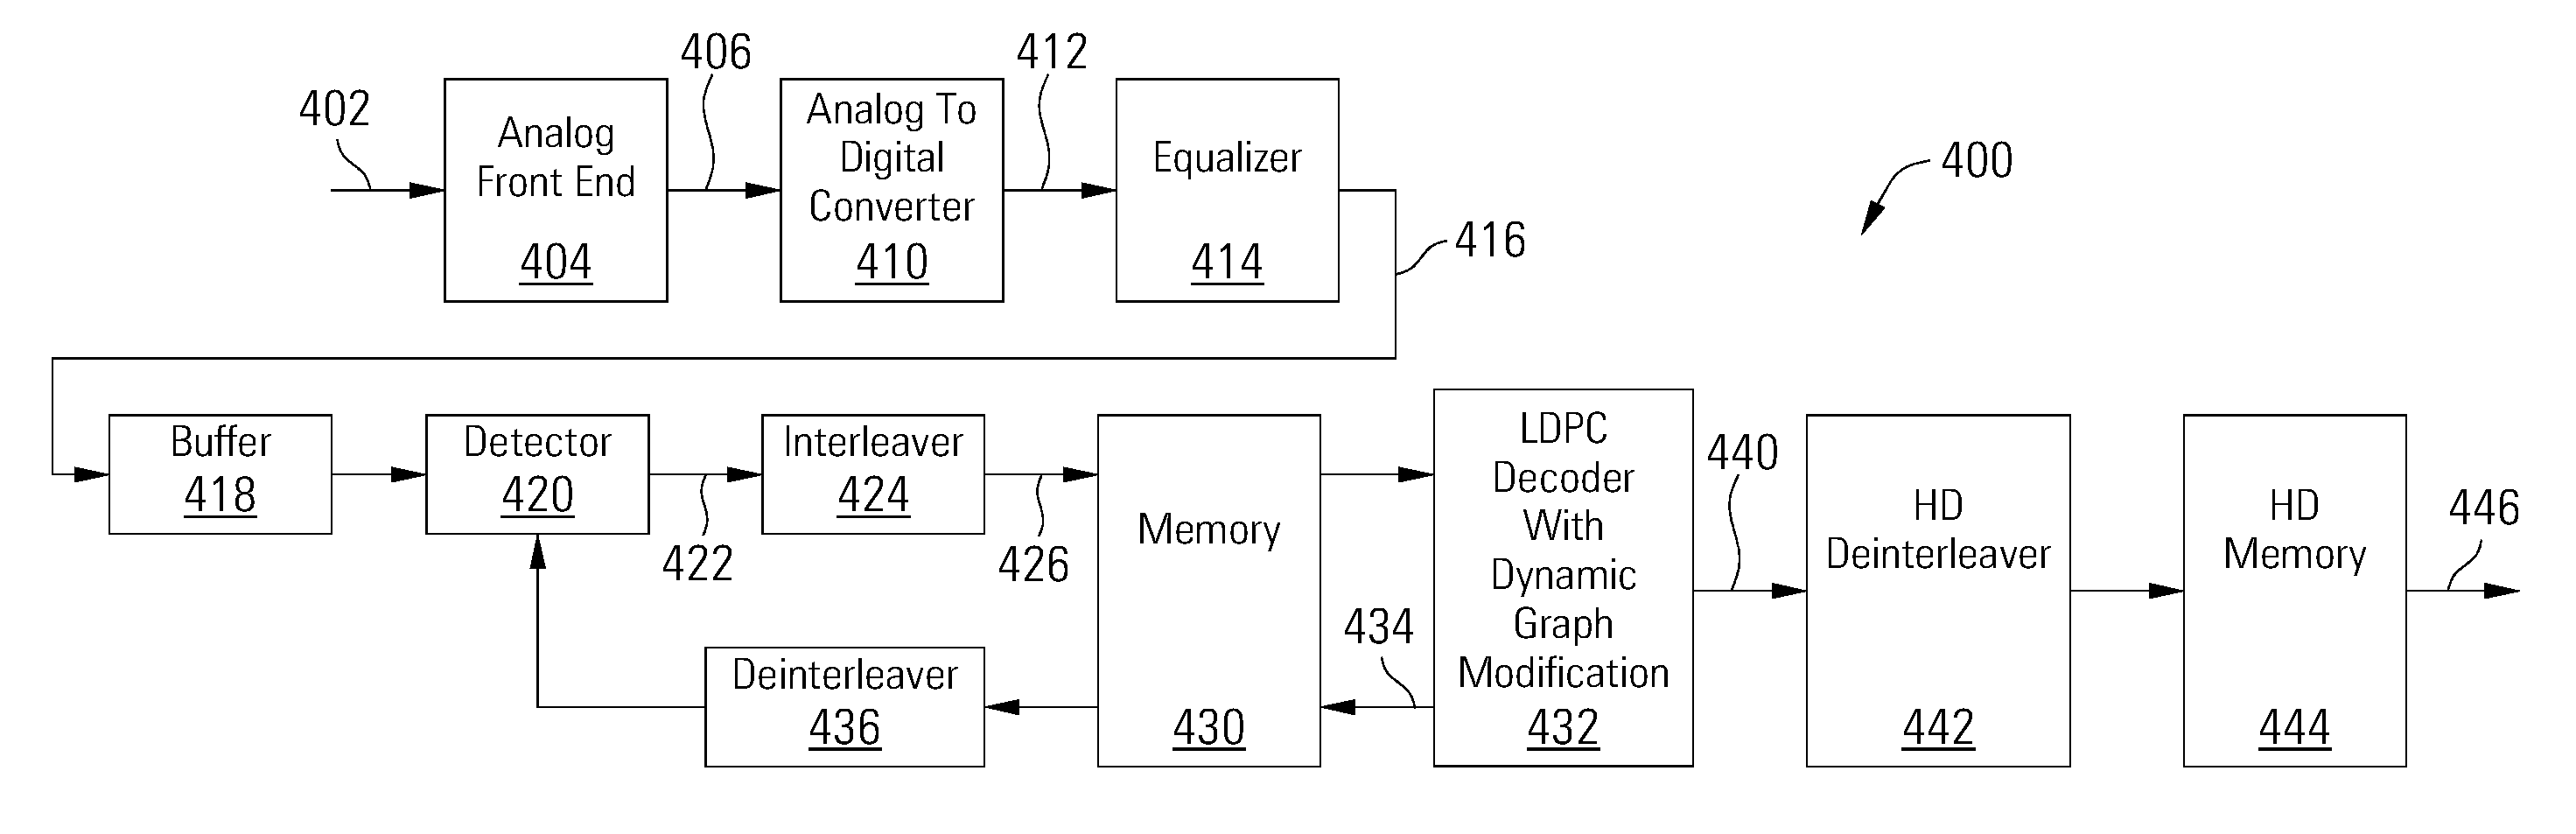 LDPC Decoder With Dynamic Graph Modification